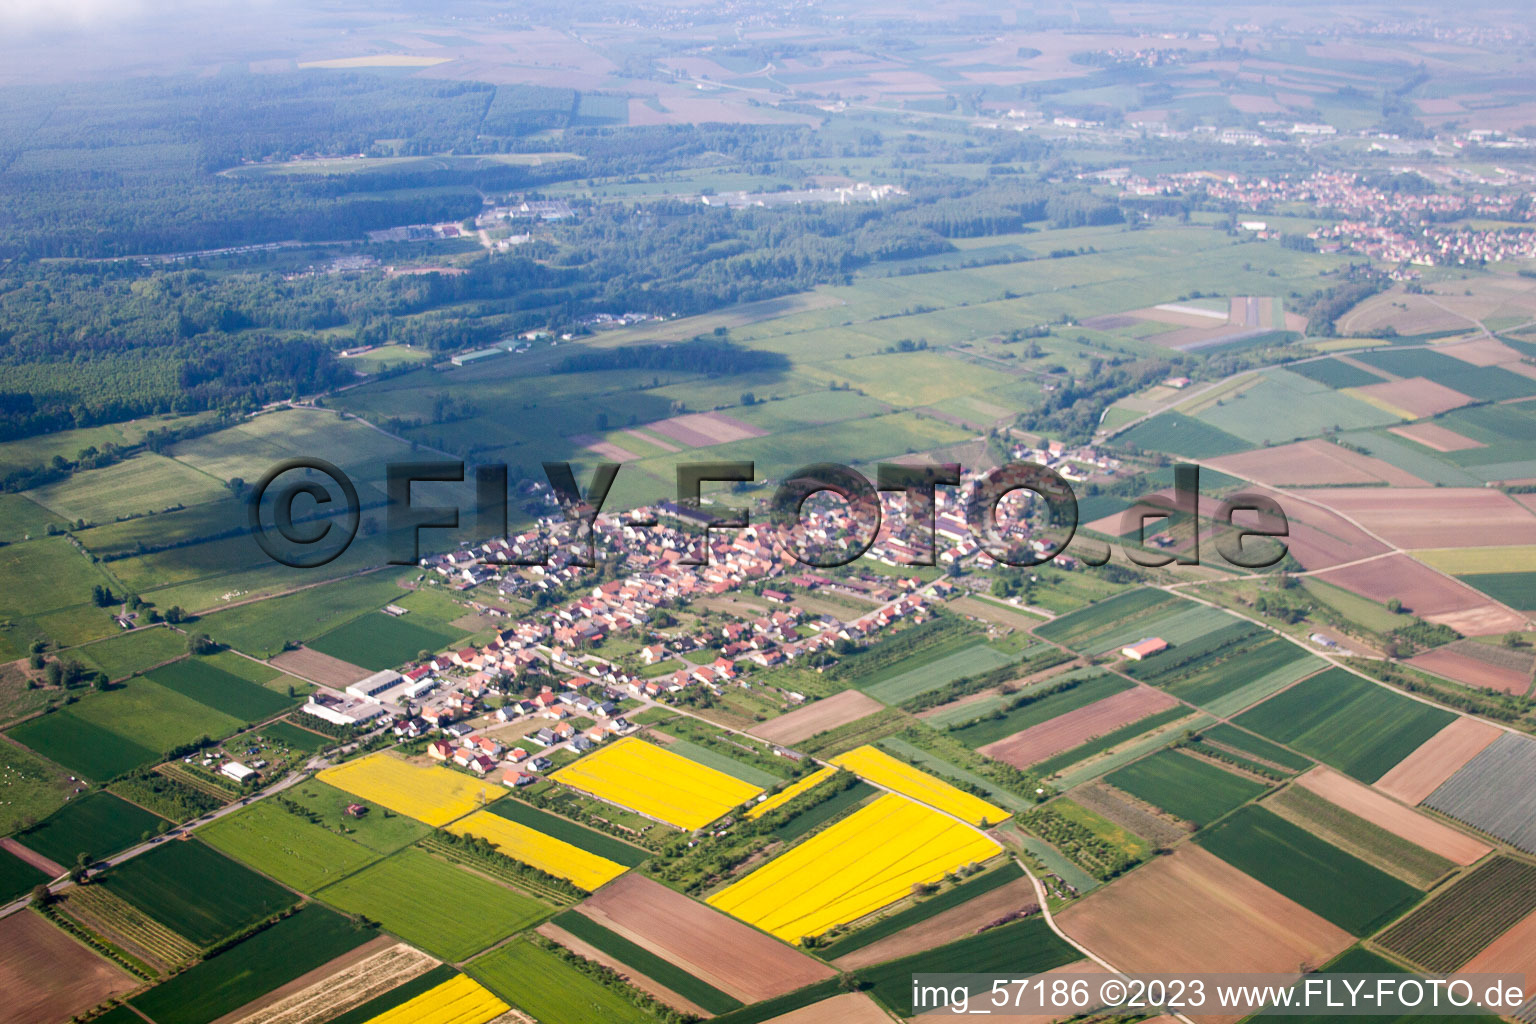 Schweighofen in the state Rhineland-Palatinate, Germany out of the air